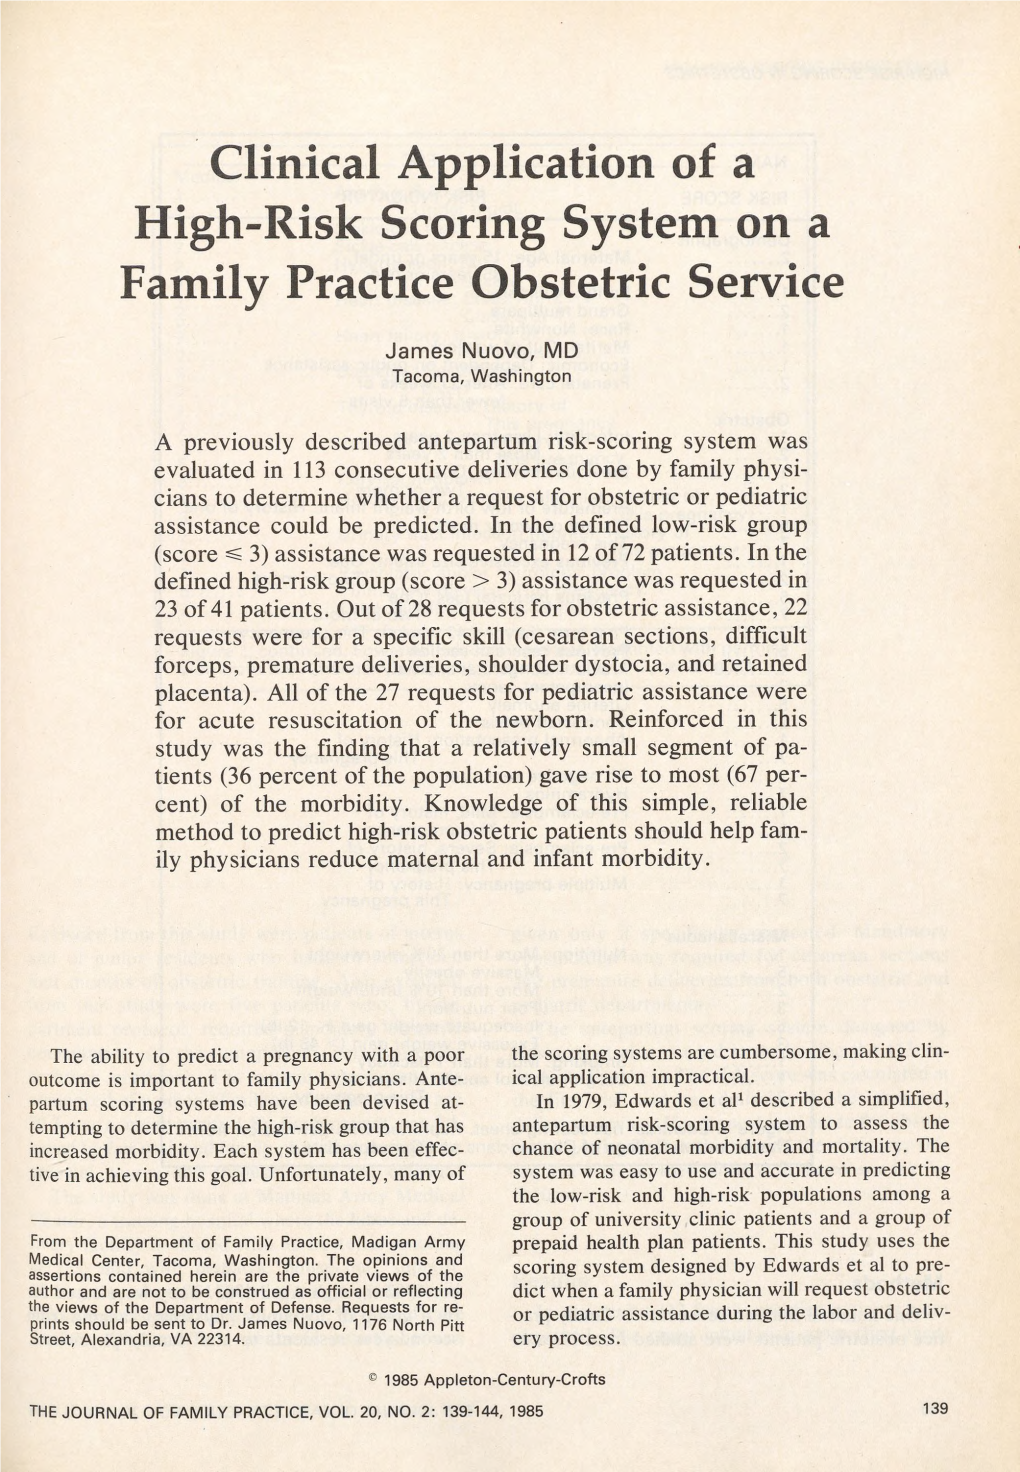 Clinical Application of a High-Risk Scoring System on a Family Practice Obstetric Service